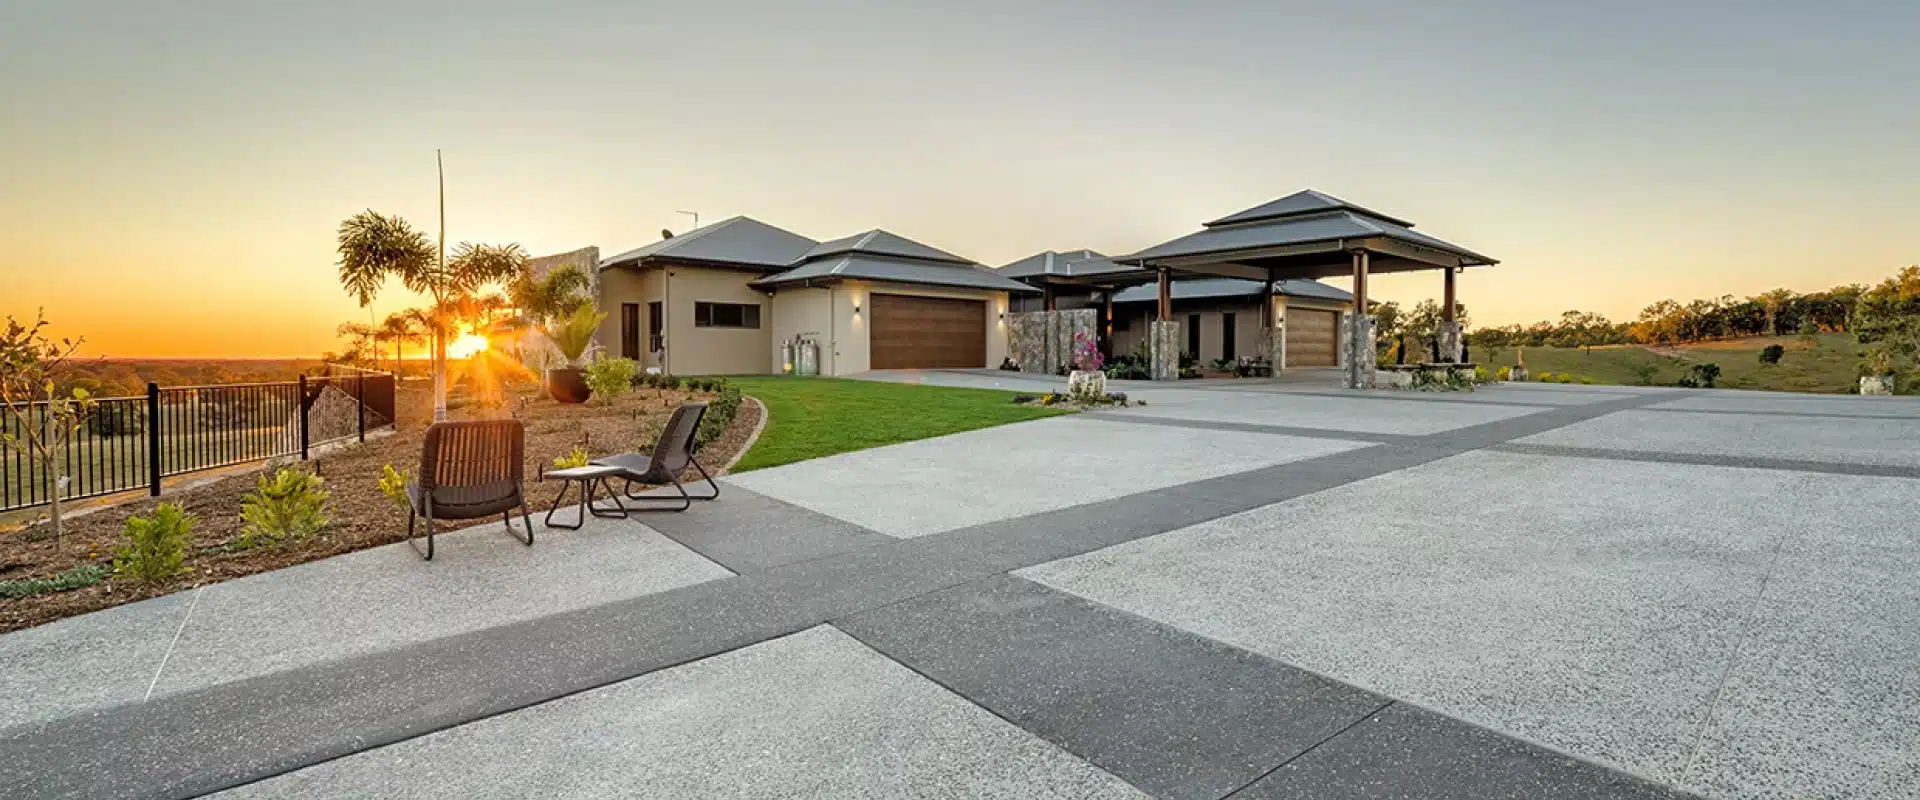 10 creative exposed aggregate driveway ideas for your Melbourne home